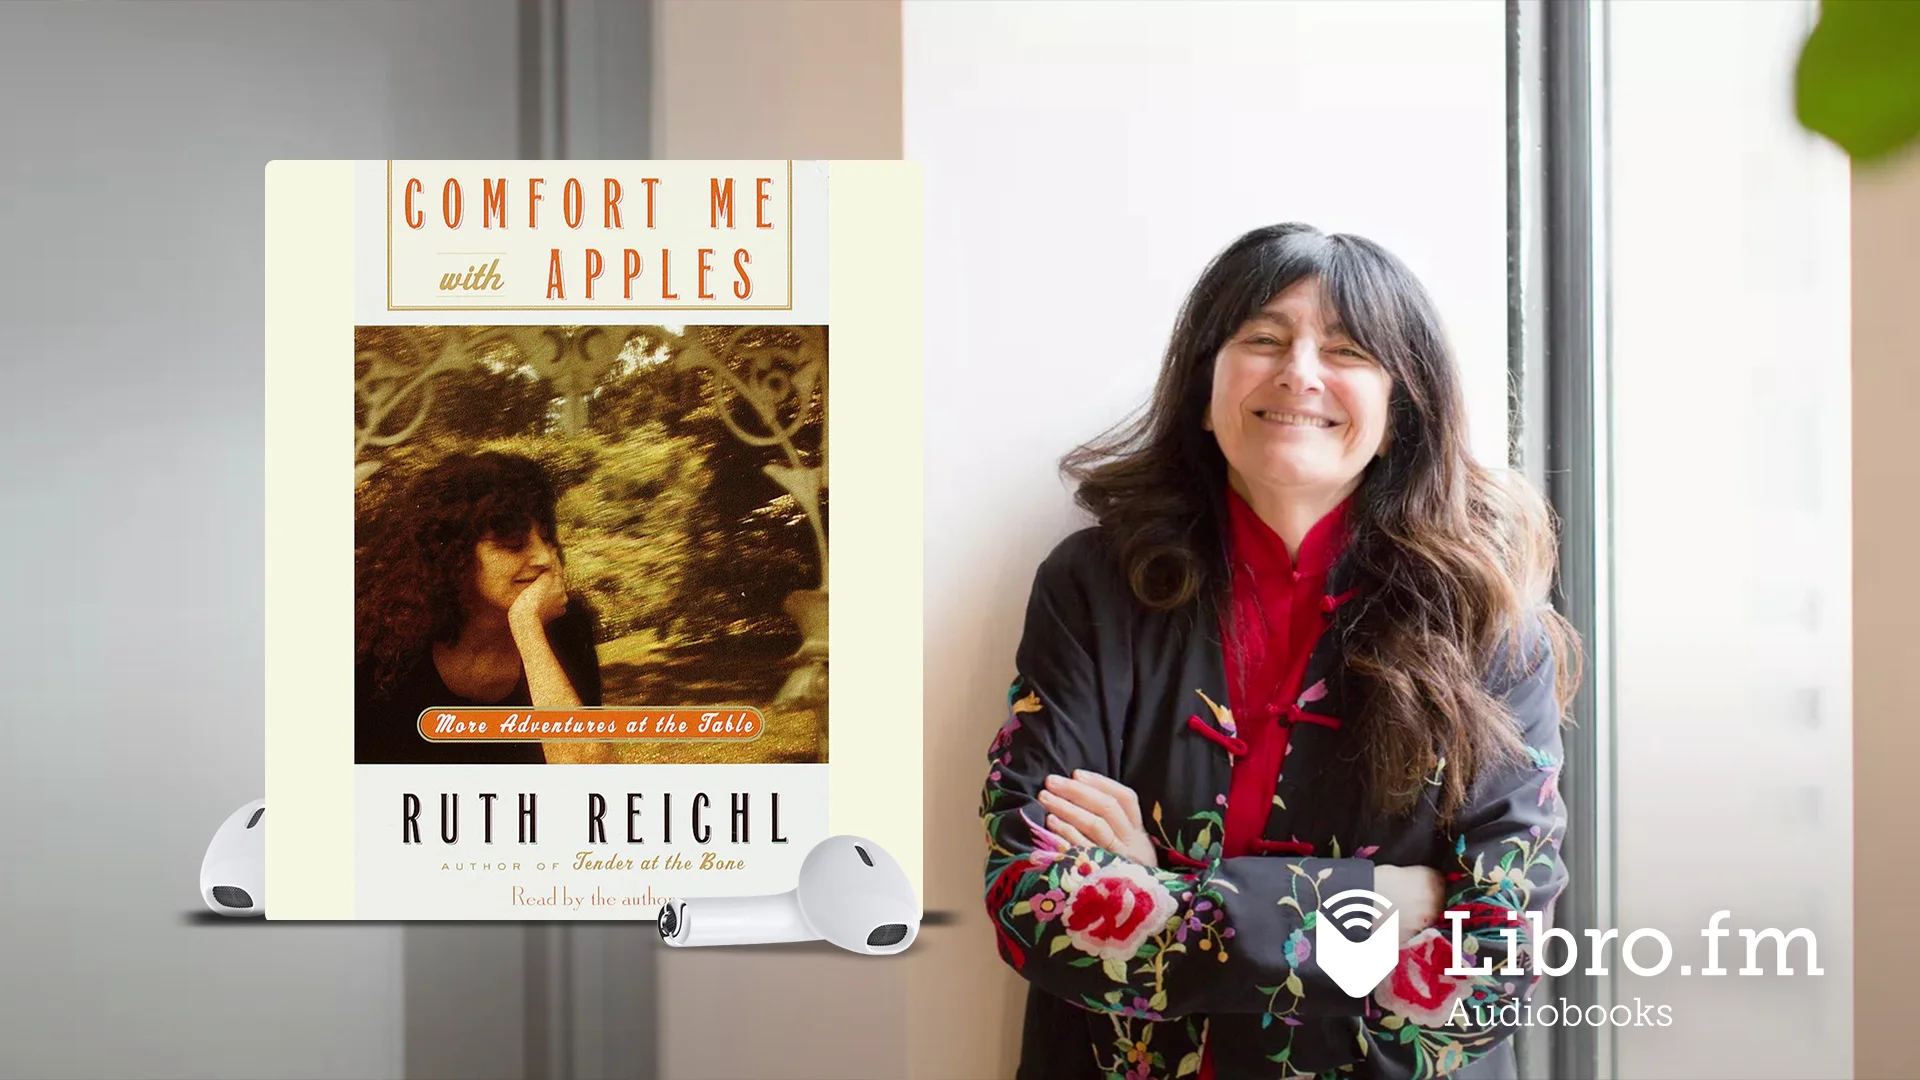 Comfort Me with Apples - Abridged (More Adventures at the Table) by Ruth  Reichl (Audiobook Excerpt) on Vimeo